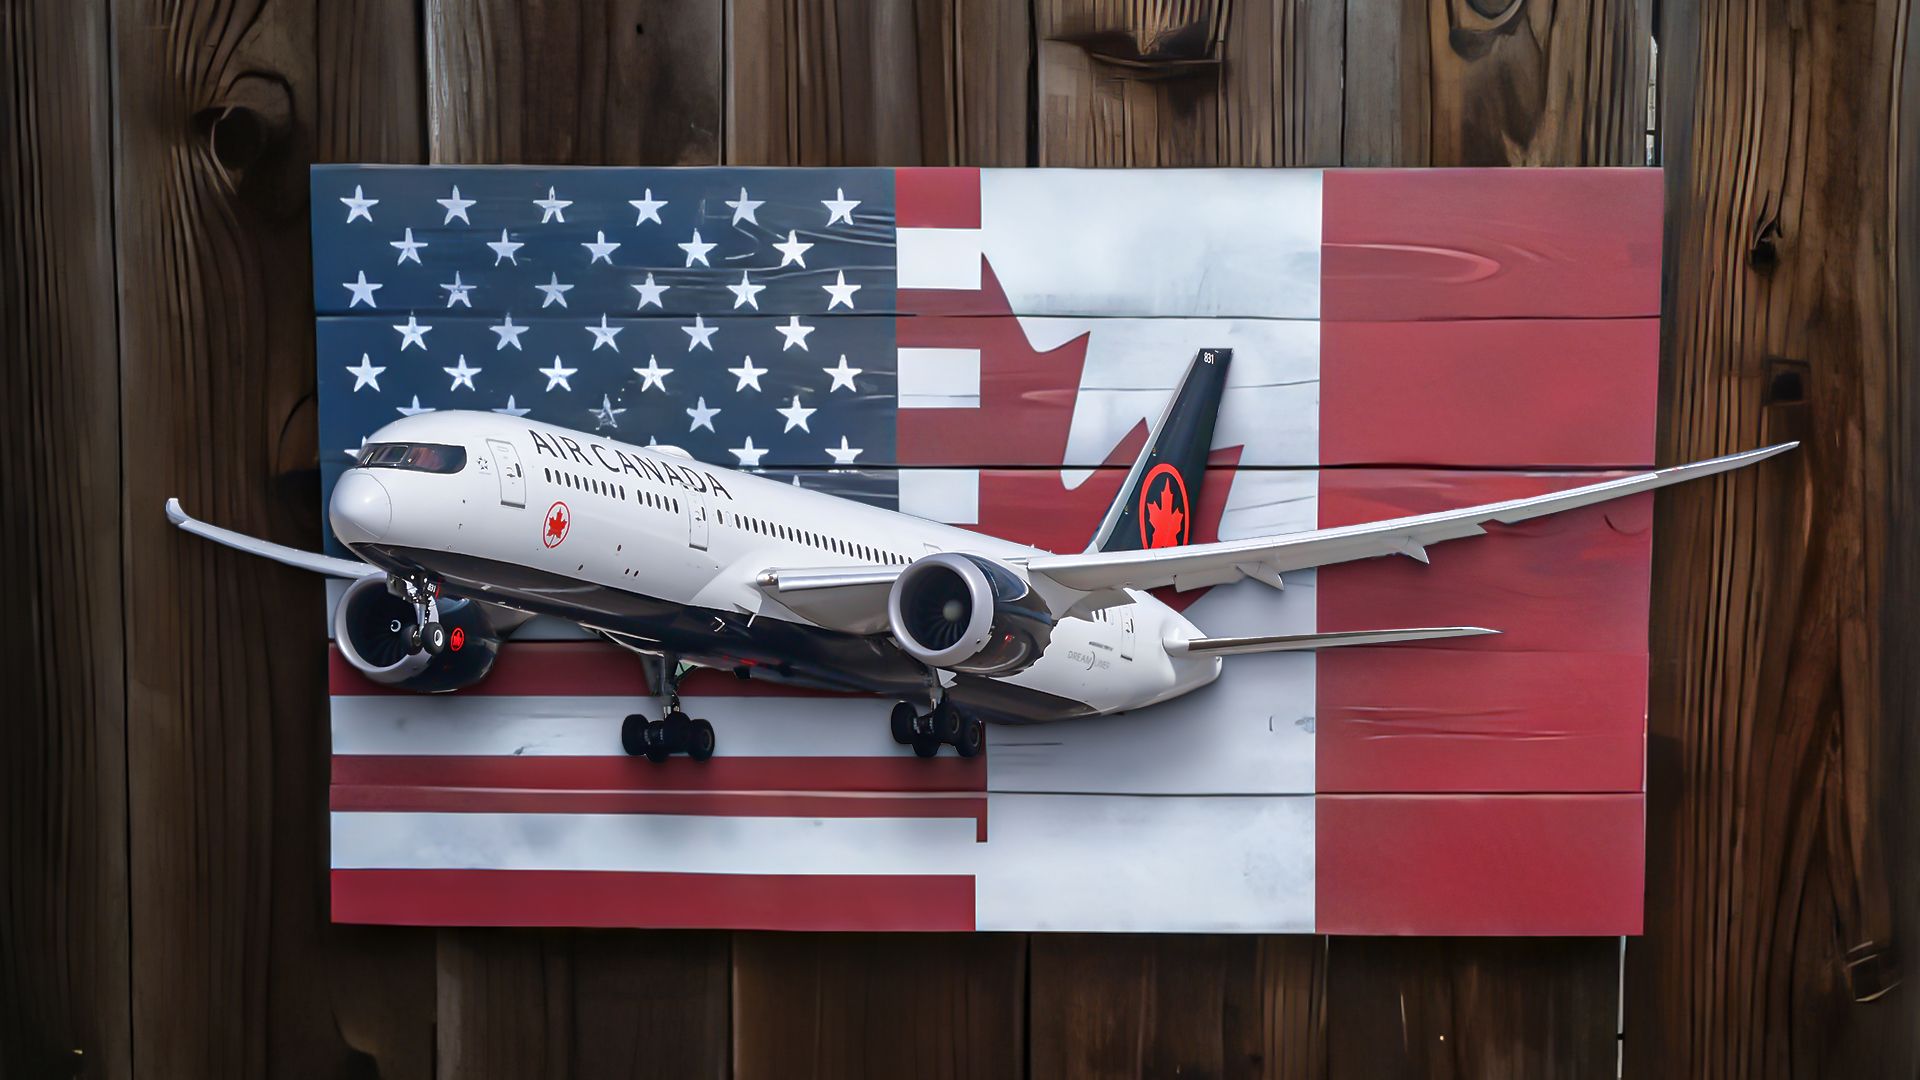 Examined: The US Routes That Air Canada Serves With Widebodies